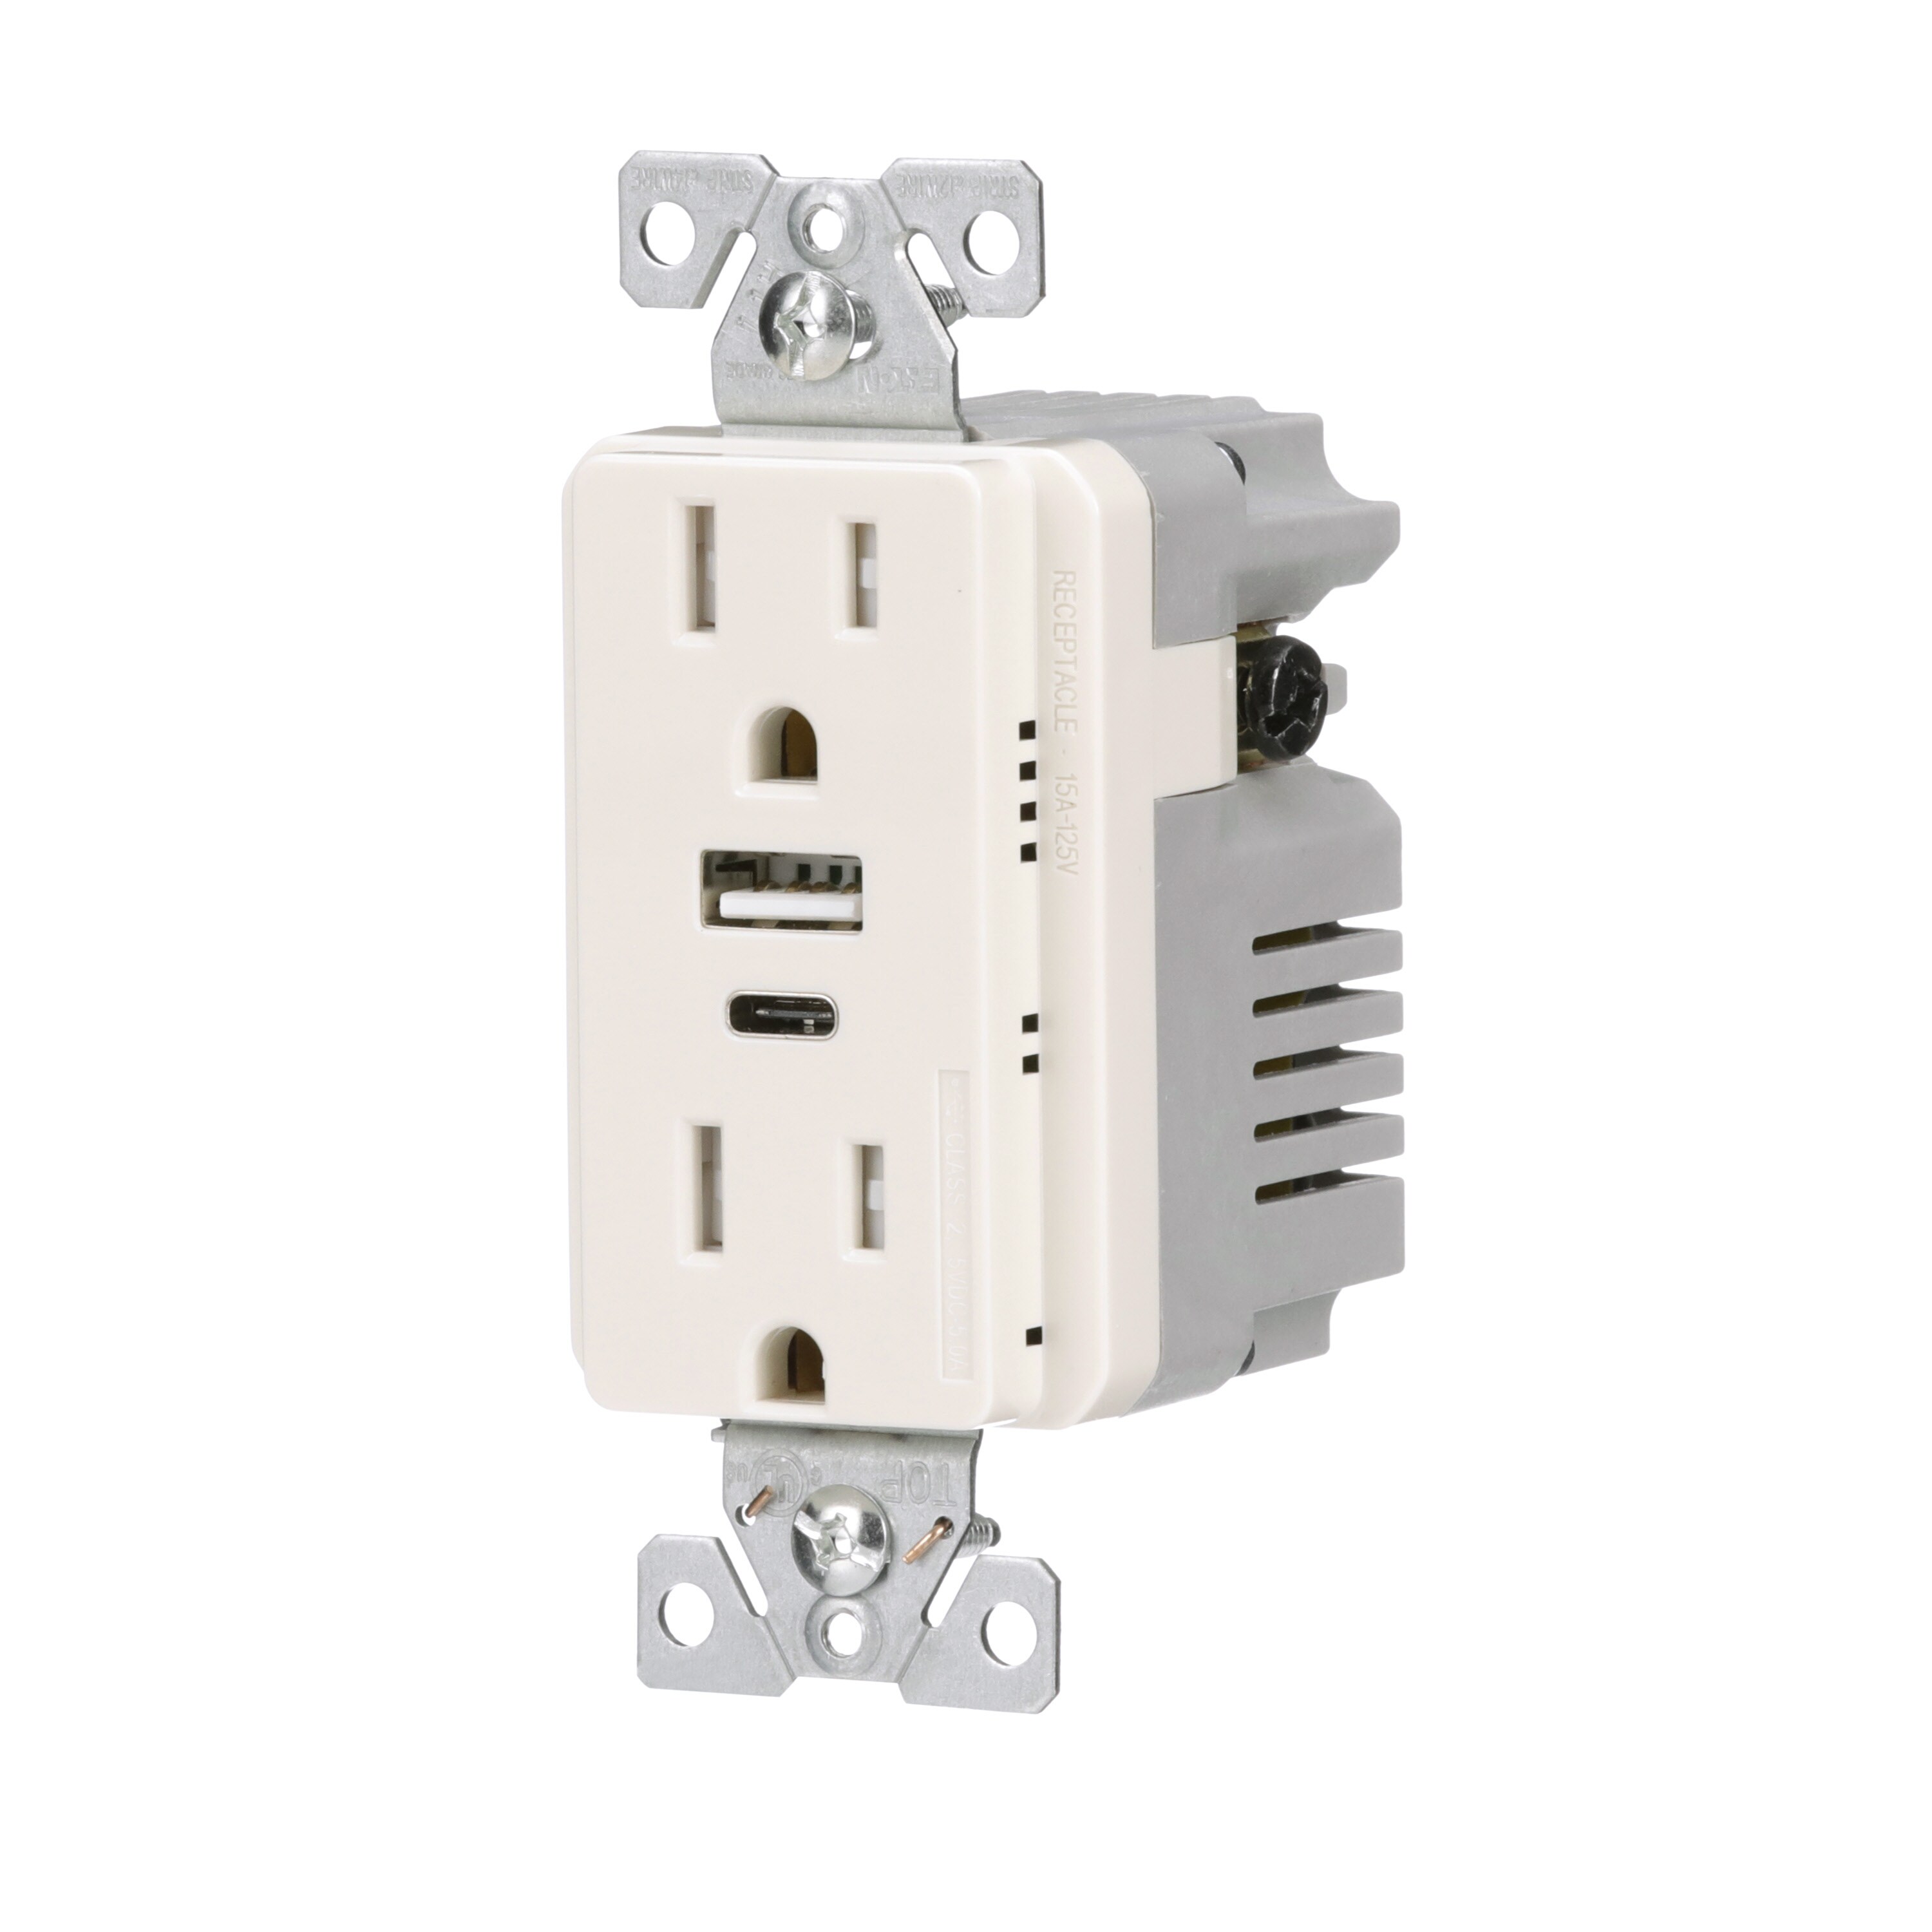 Pass & Seymour TR5262USB-GRY 125VAC 15AMP Outlet with 3.1AMP USB Charger 